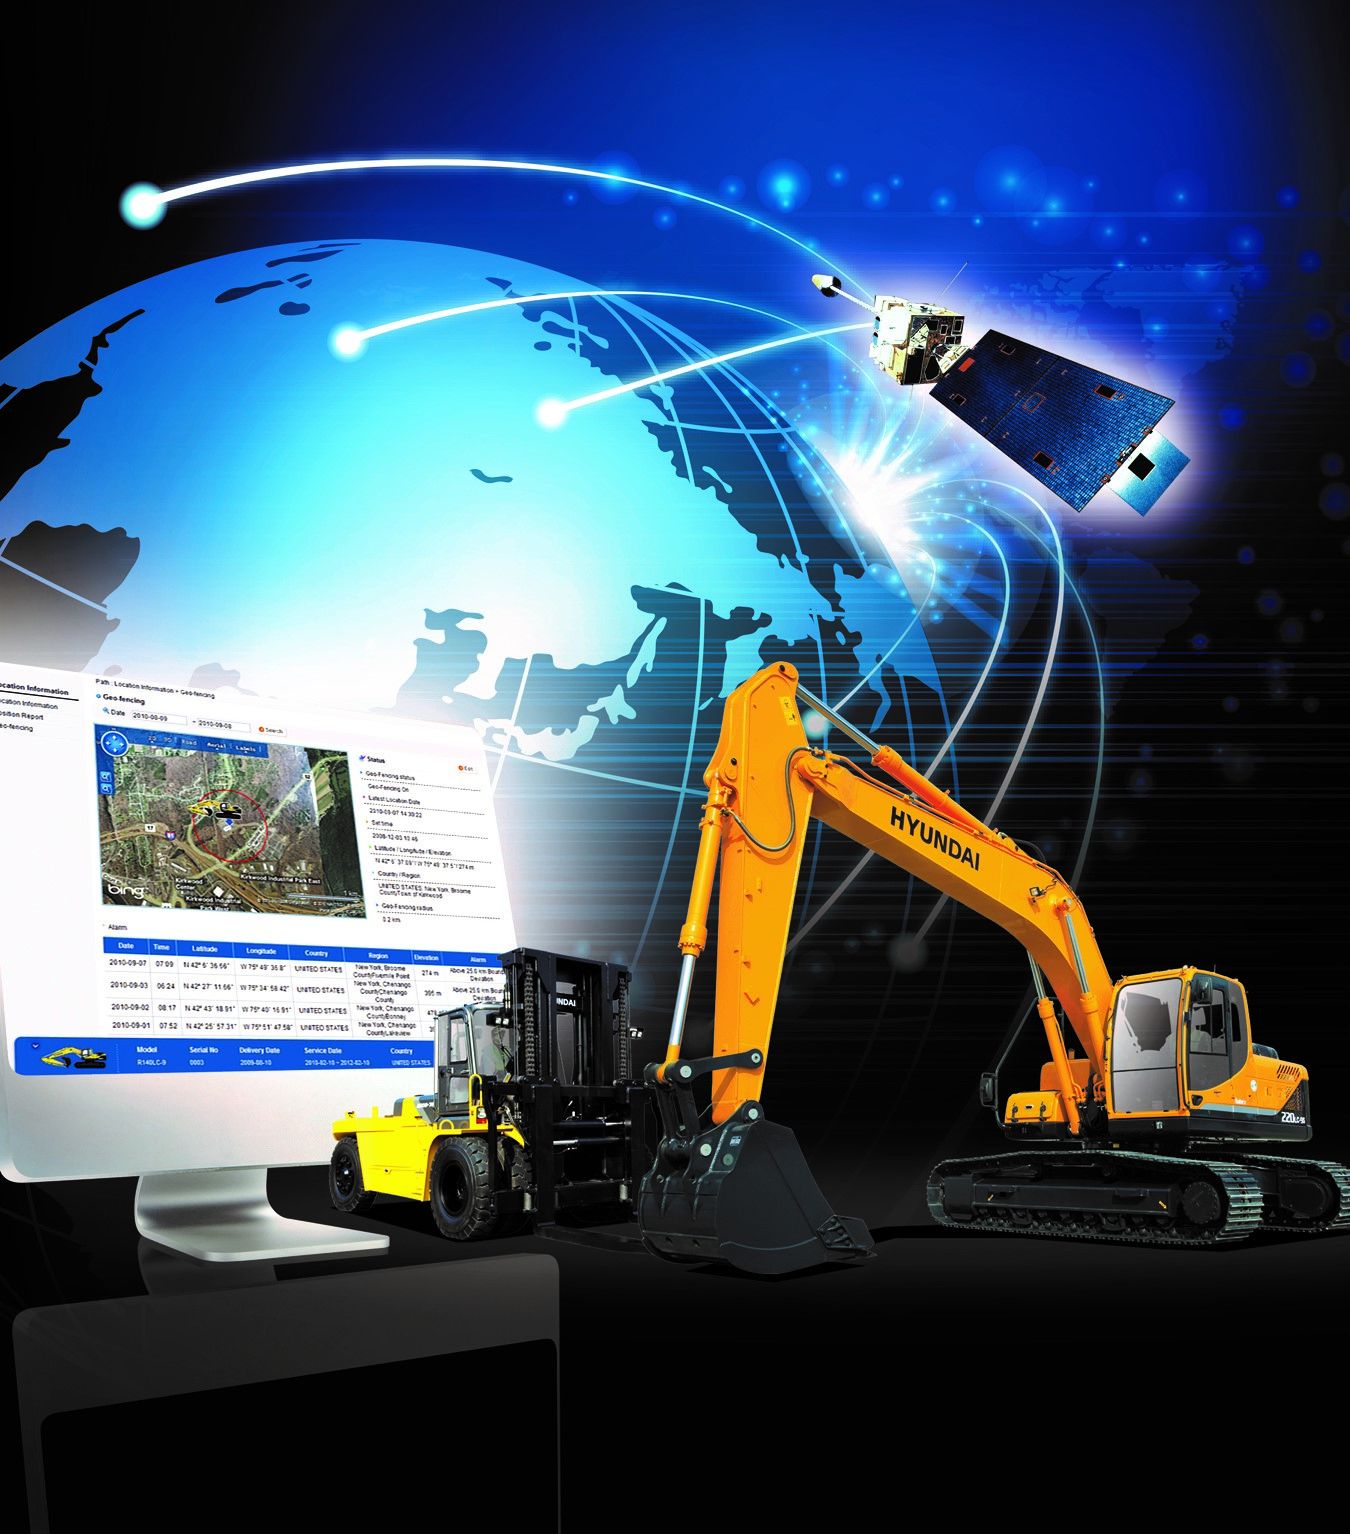 Hyundai Construction Equipment Expands Availability of Hi-Mate Remote Management System to Compact Excavators